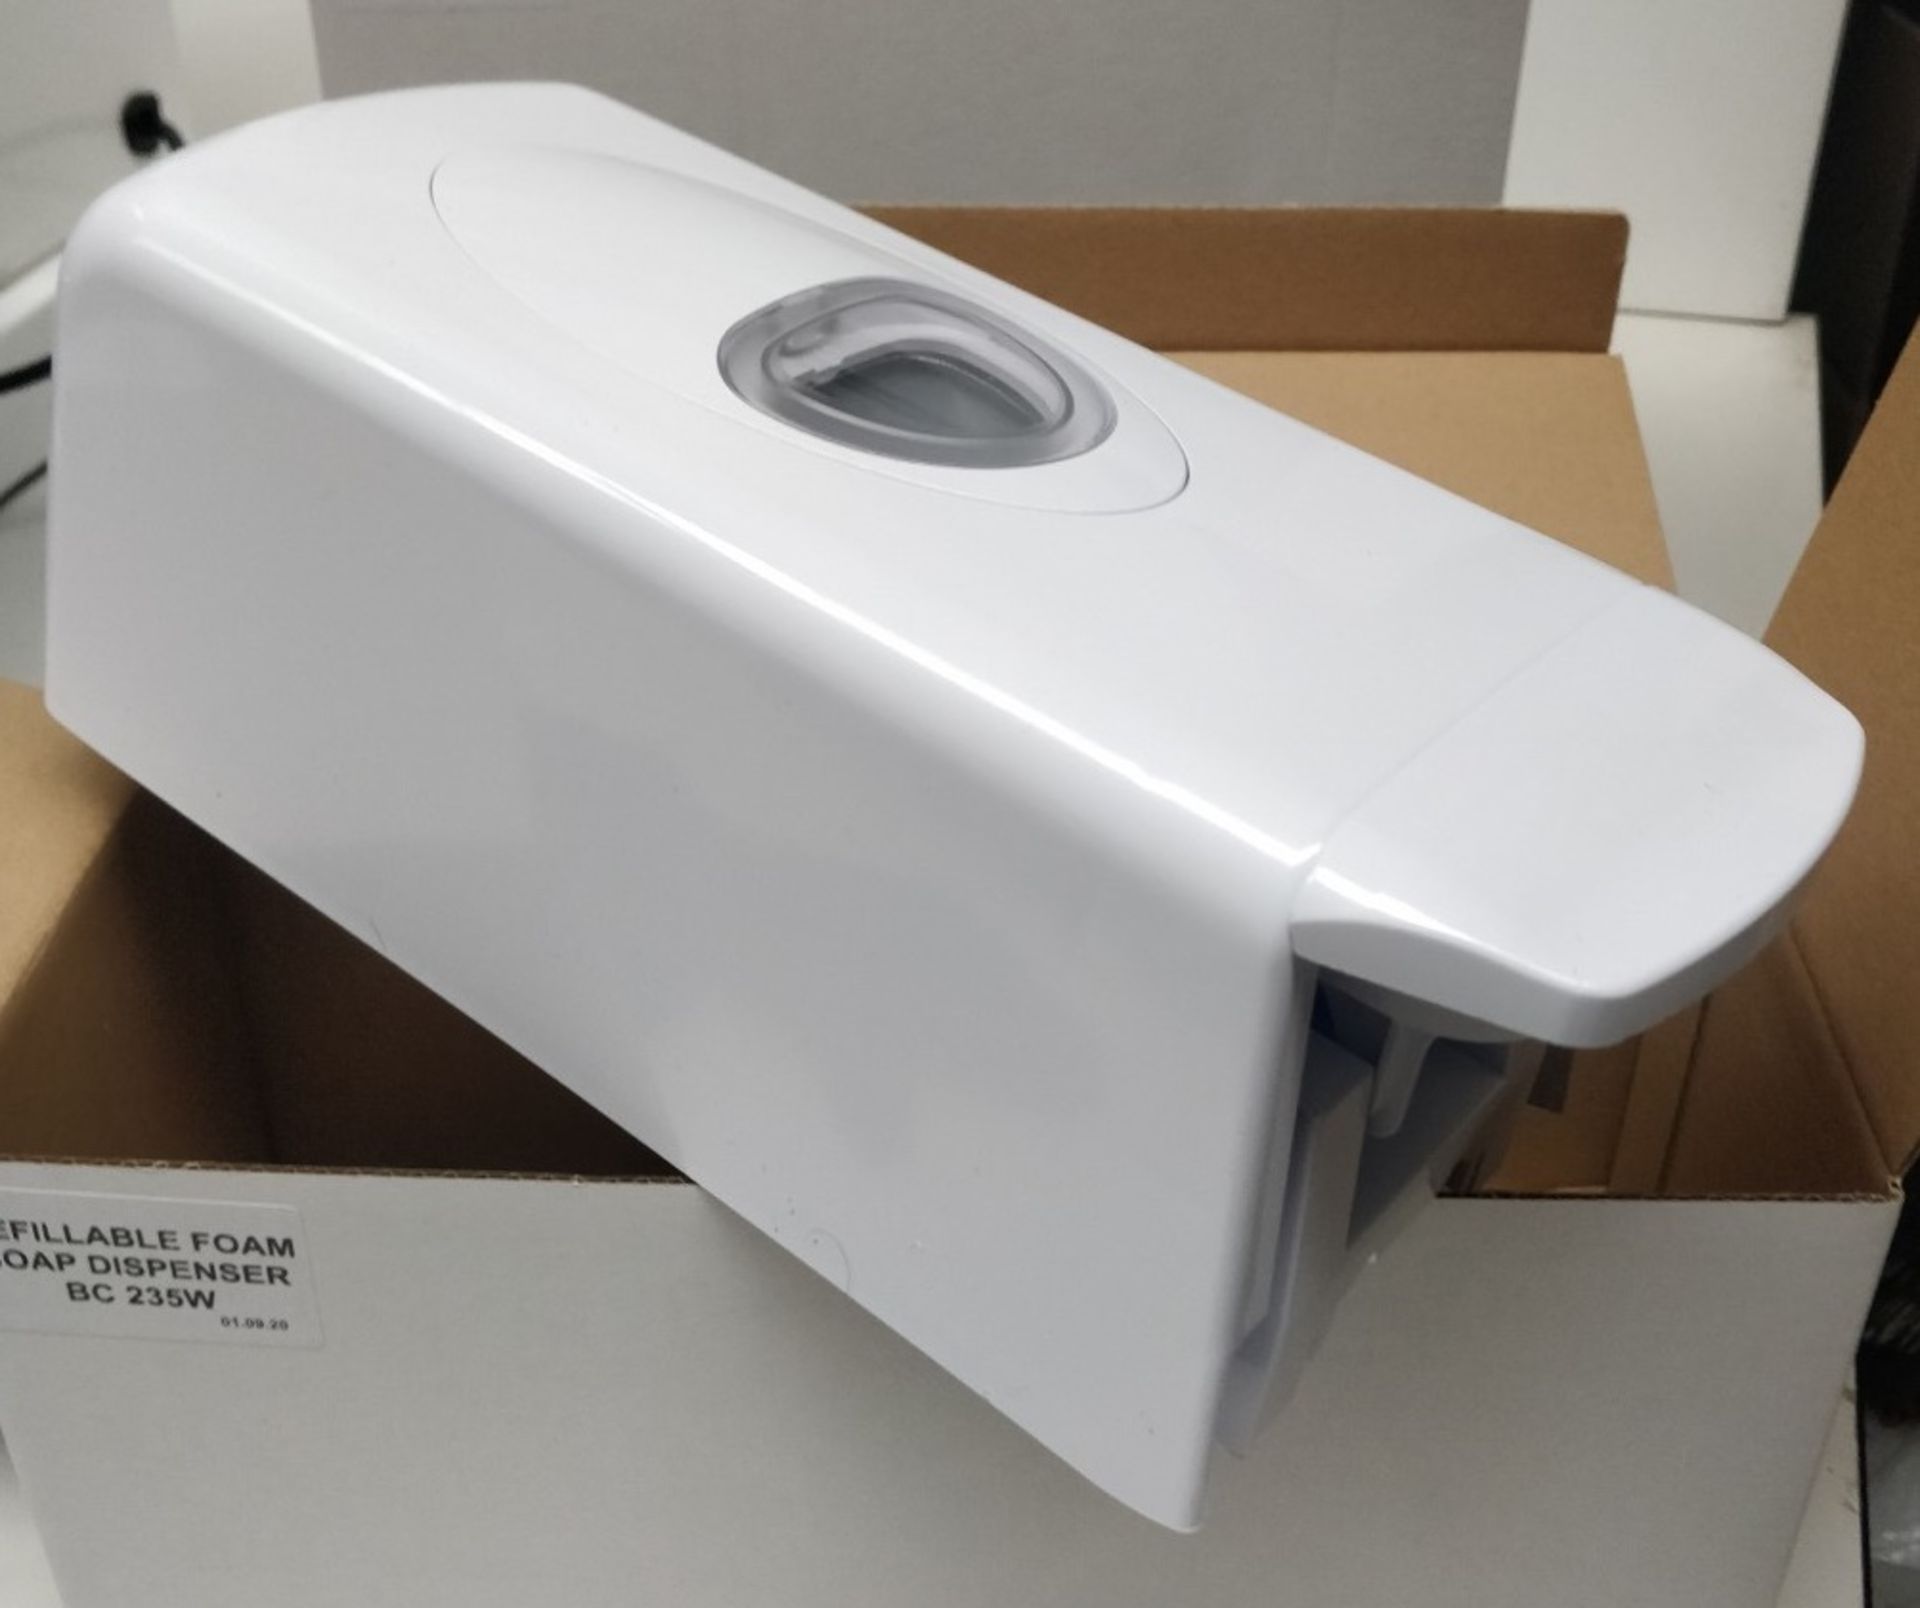 4 x Refillable Hand Soap Dispensers in White - Model BC 235W - Brand New and Boxed - Recently - Image 4 of 5